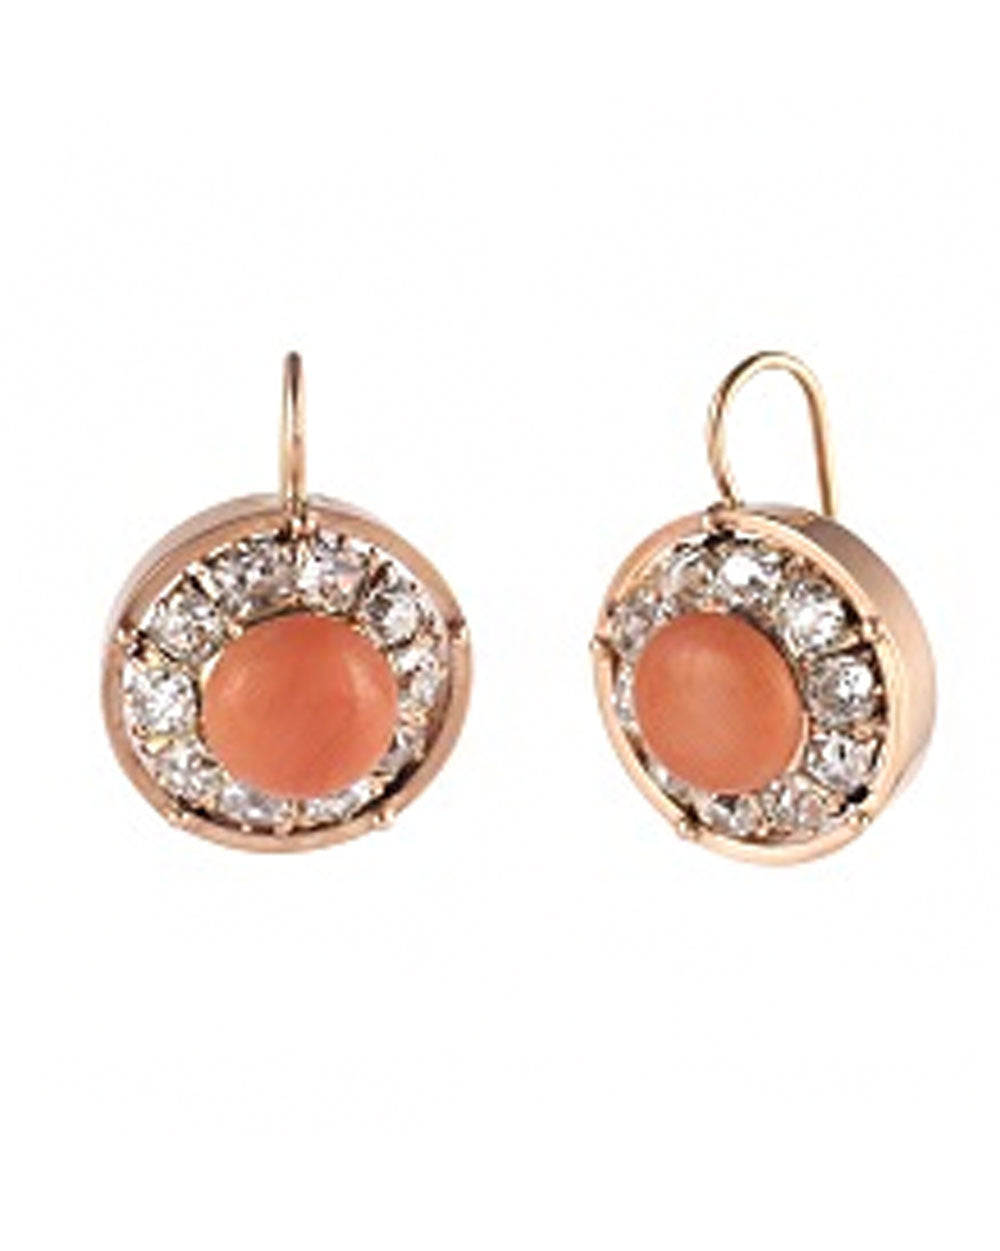 Fame and Fortune Victorian Coral Earrings